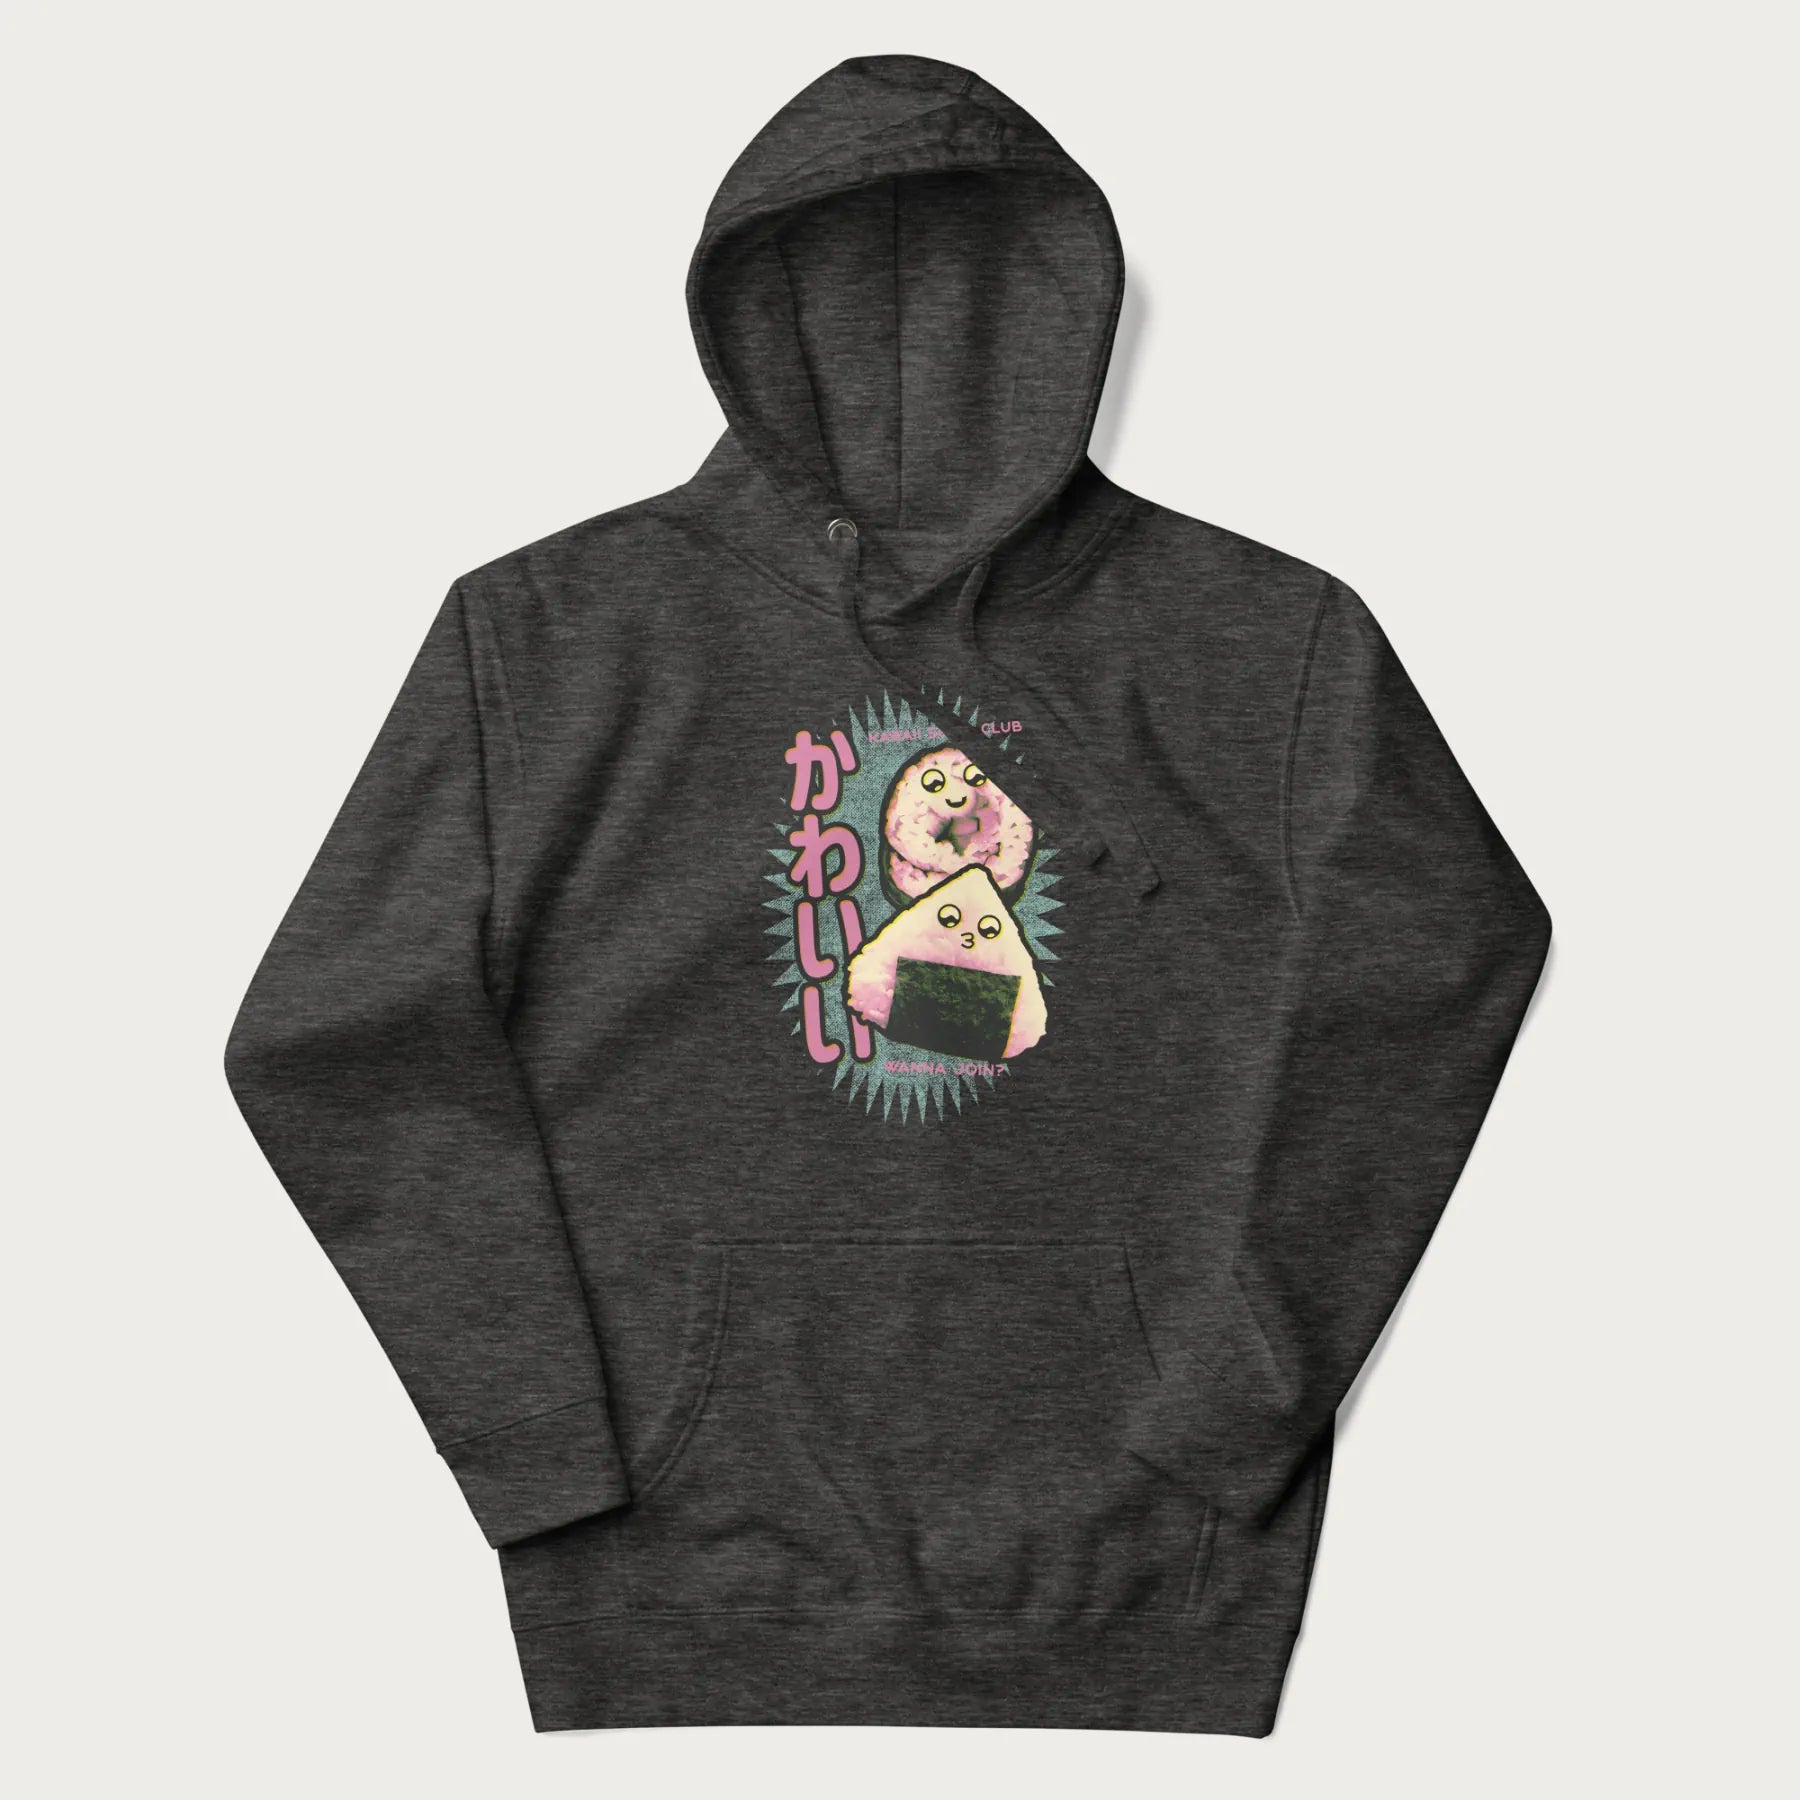 Dark grey hoodie featuring a cute sushi and onigiri graphic with the text "Kawaii Sushi Club", colorful neon accents and Japanese characters.